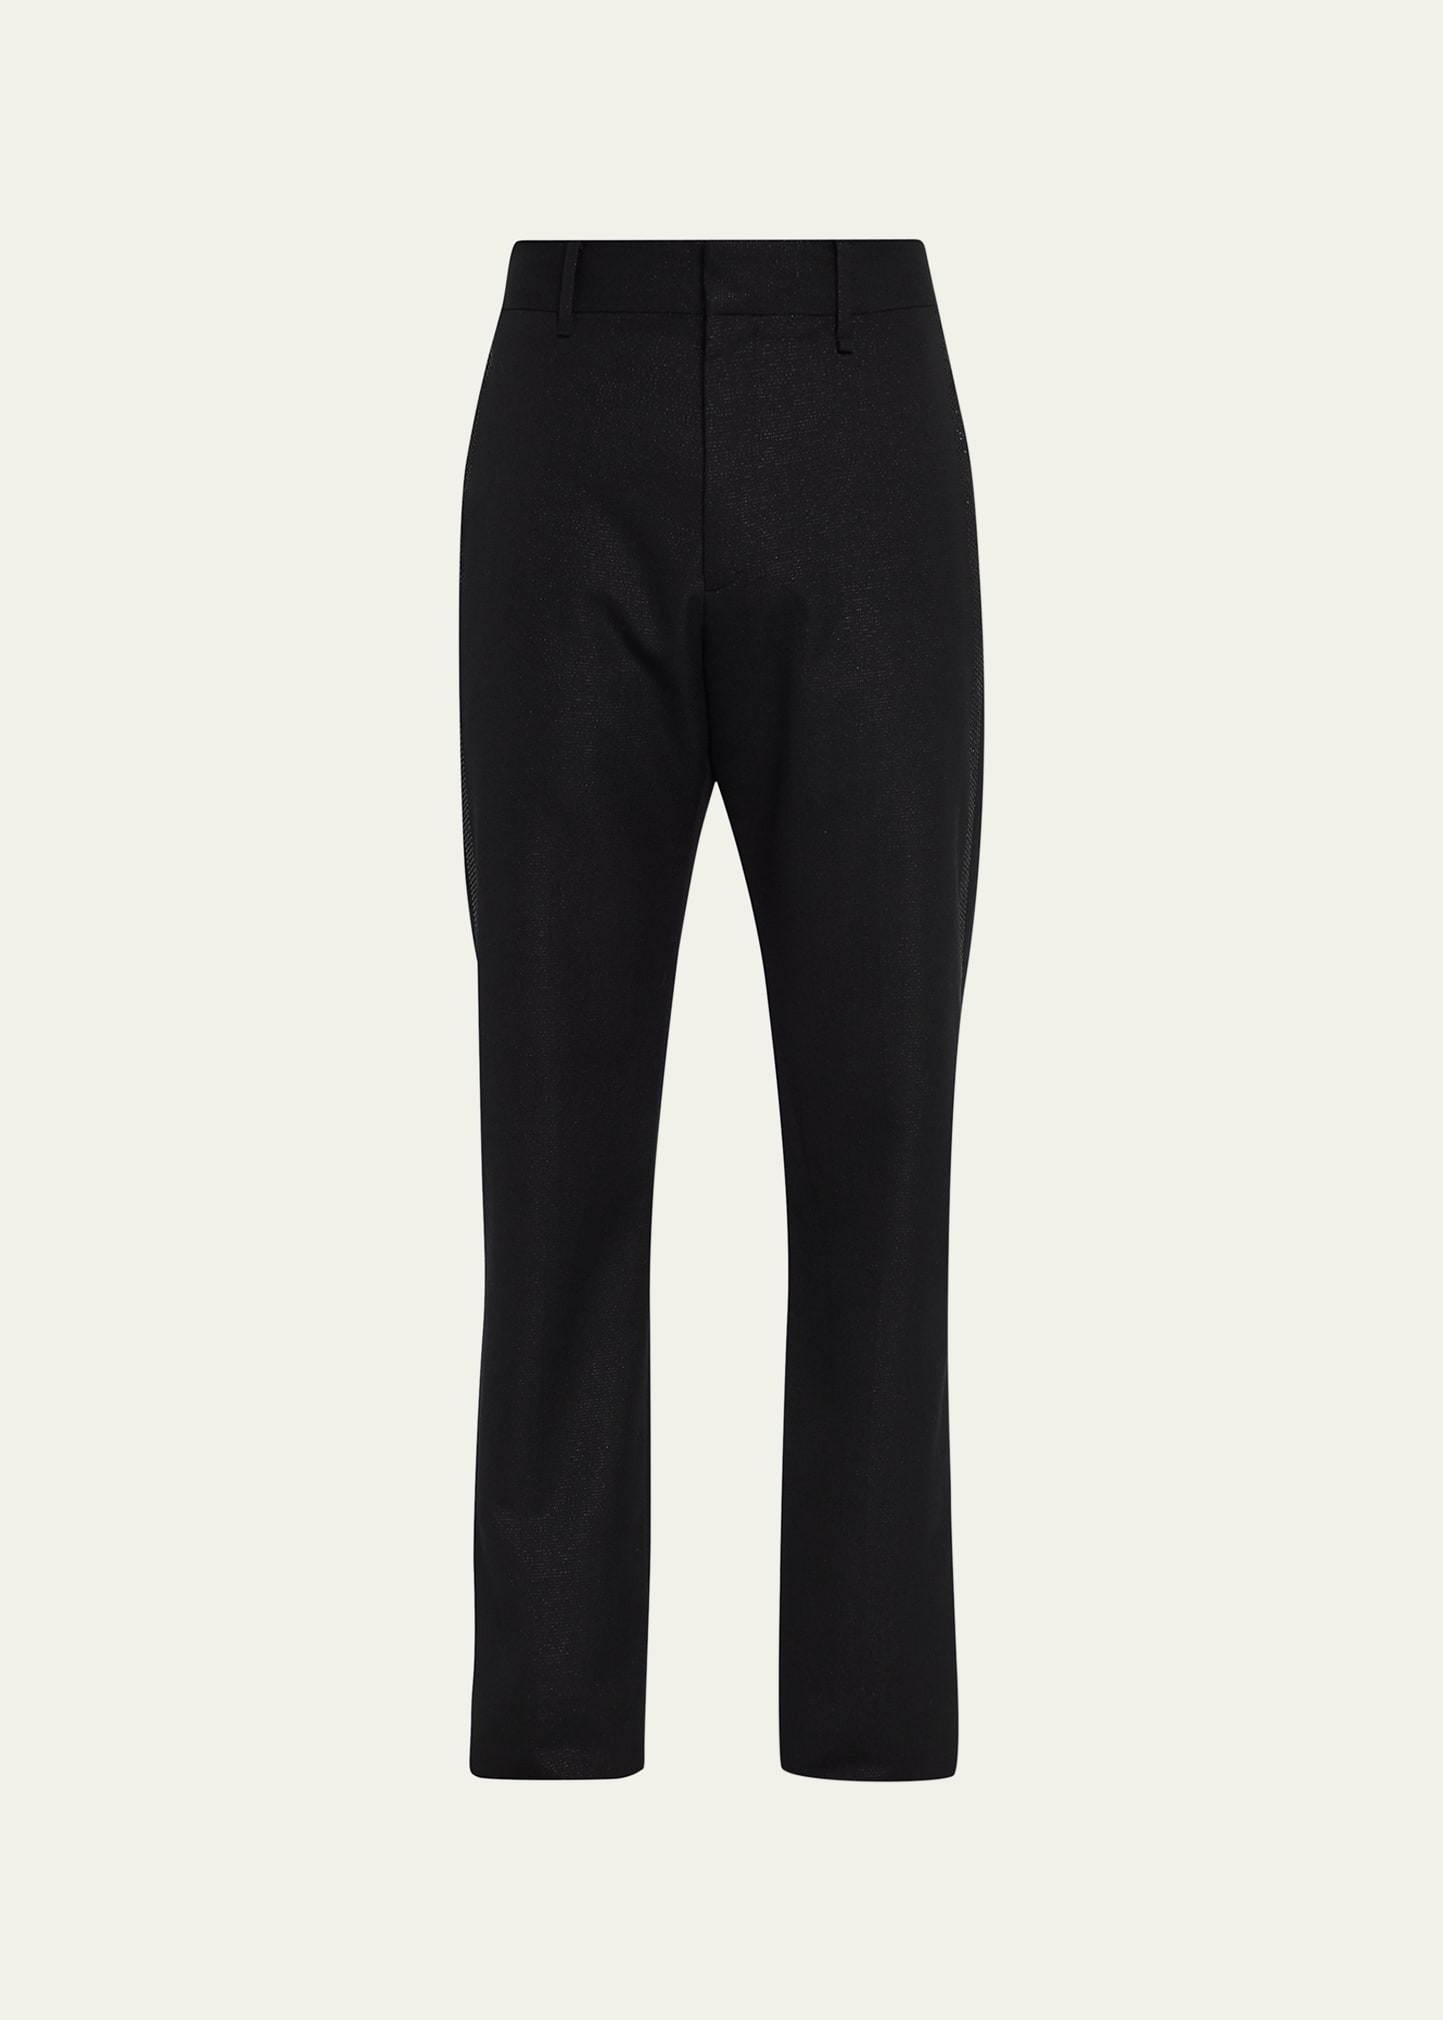 Givenchy Men's Wool Trousers With Side Crystal Embellishments In Black